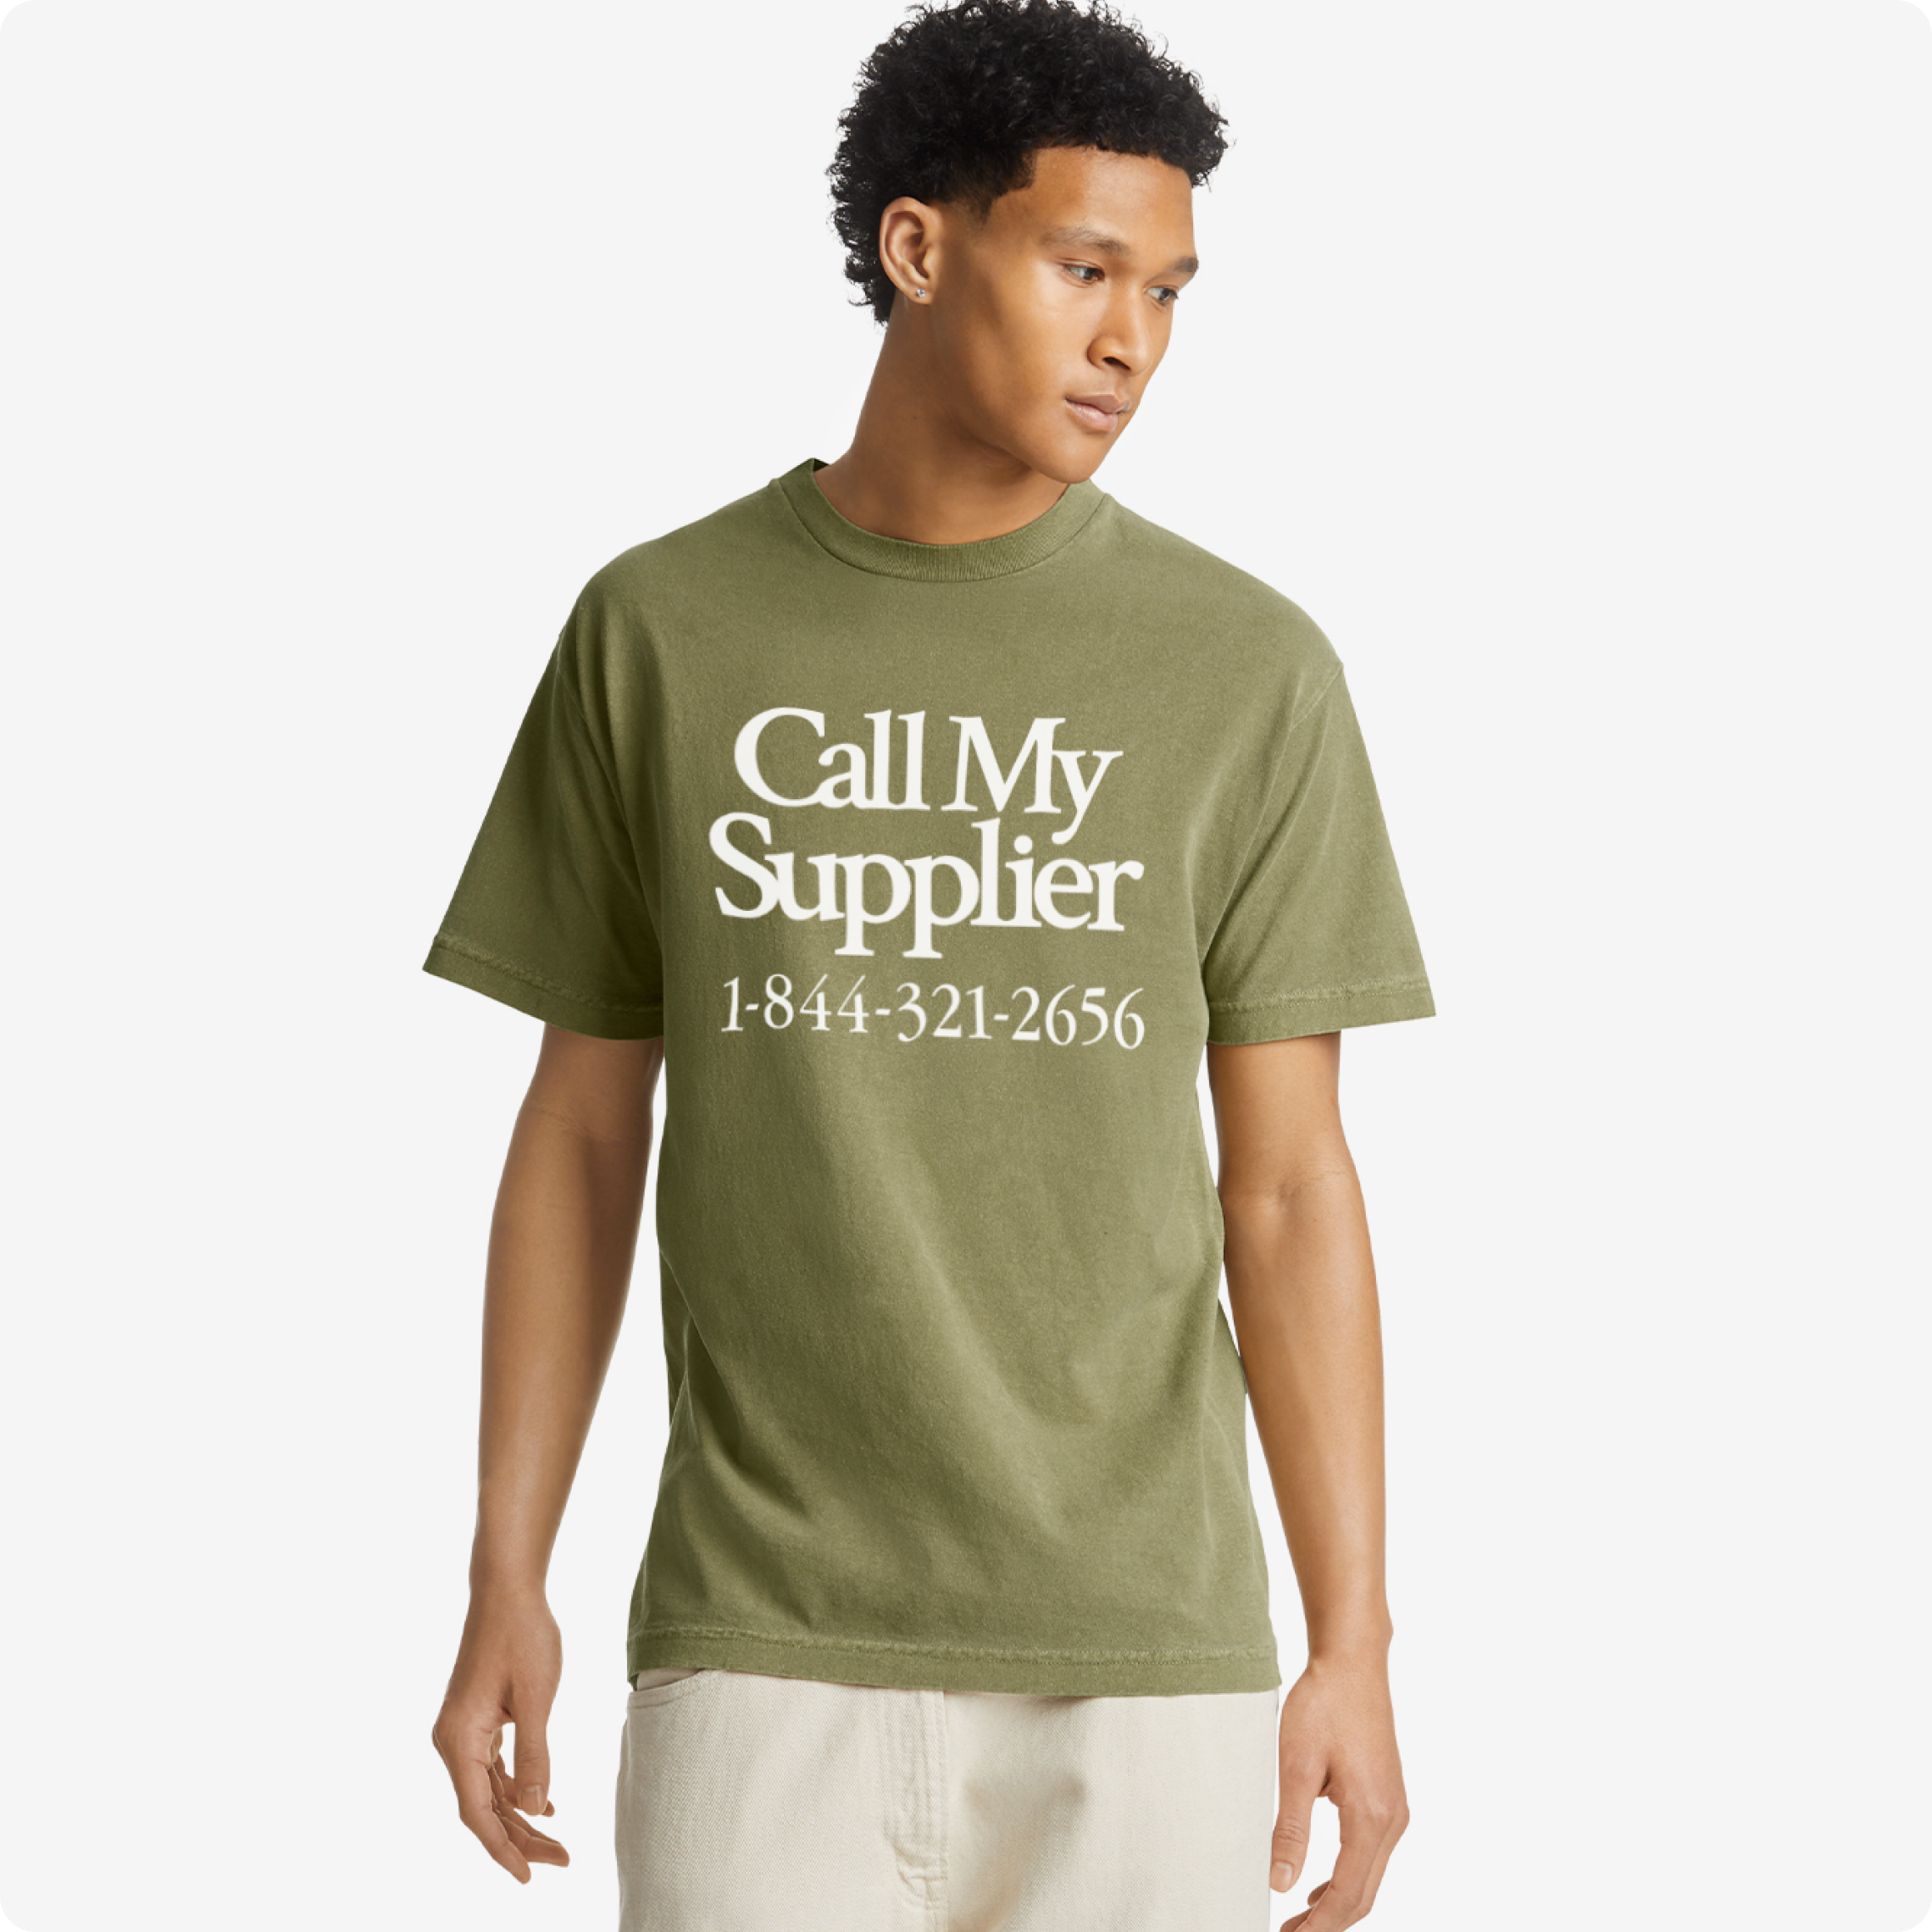 Man wearing a green t-shirt with 'Call My Supplier' text